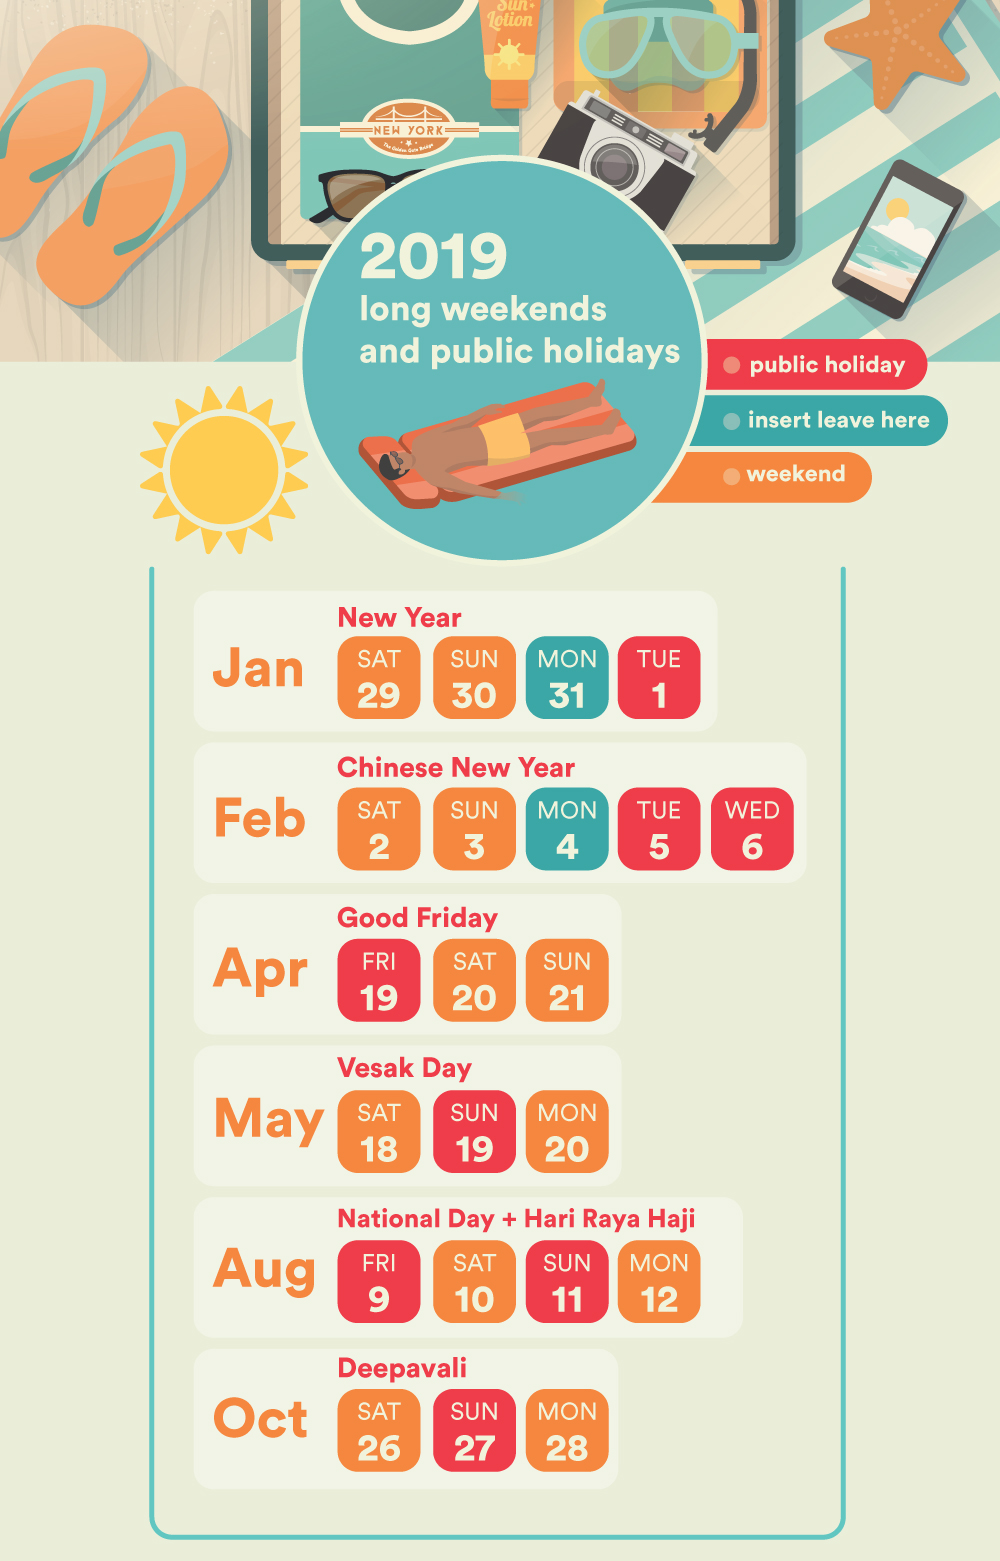 Long Weekends And Holiday Ideas For 2019 Fwd Singapore